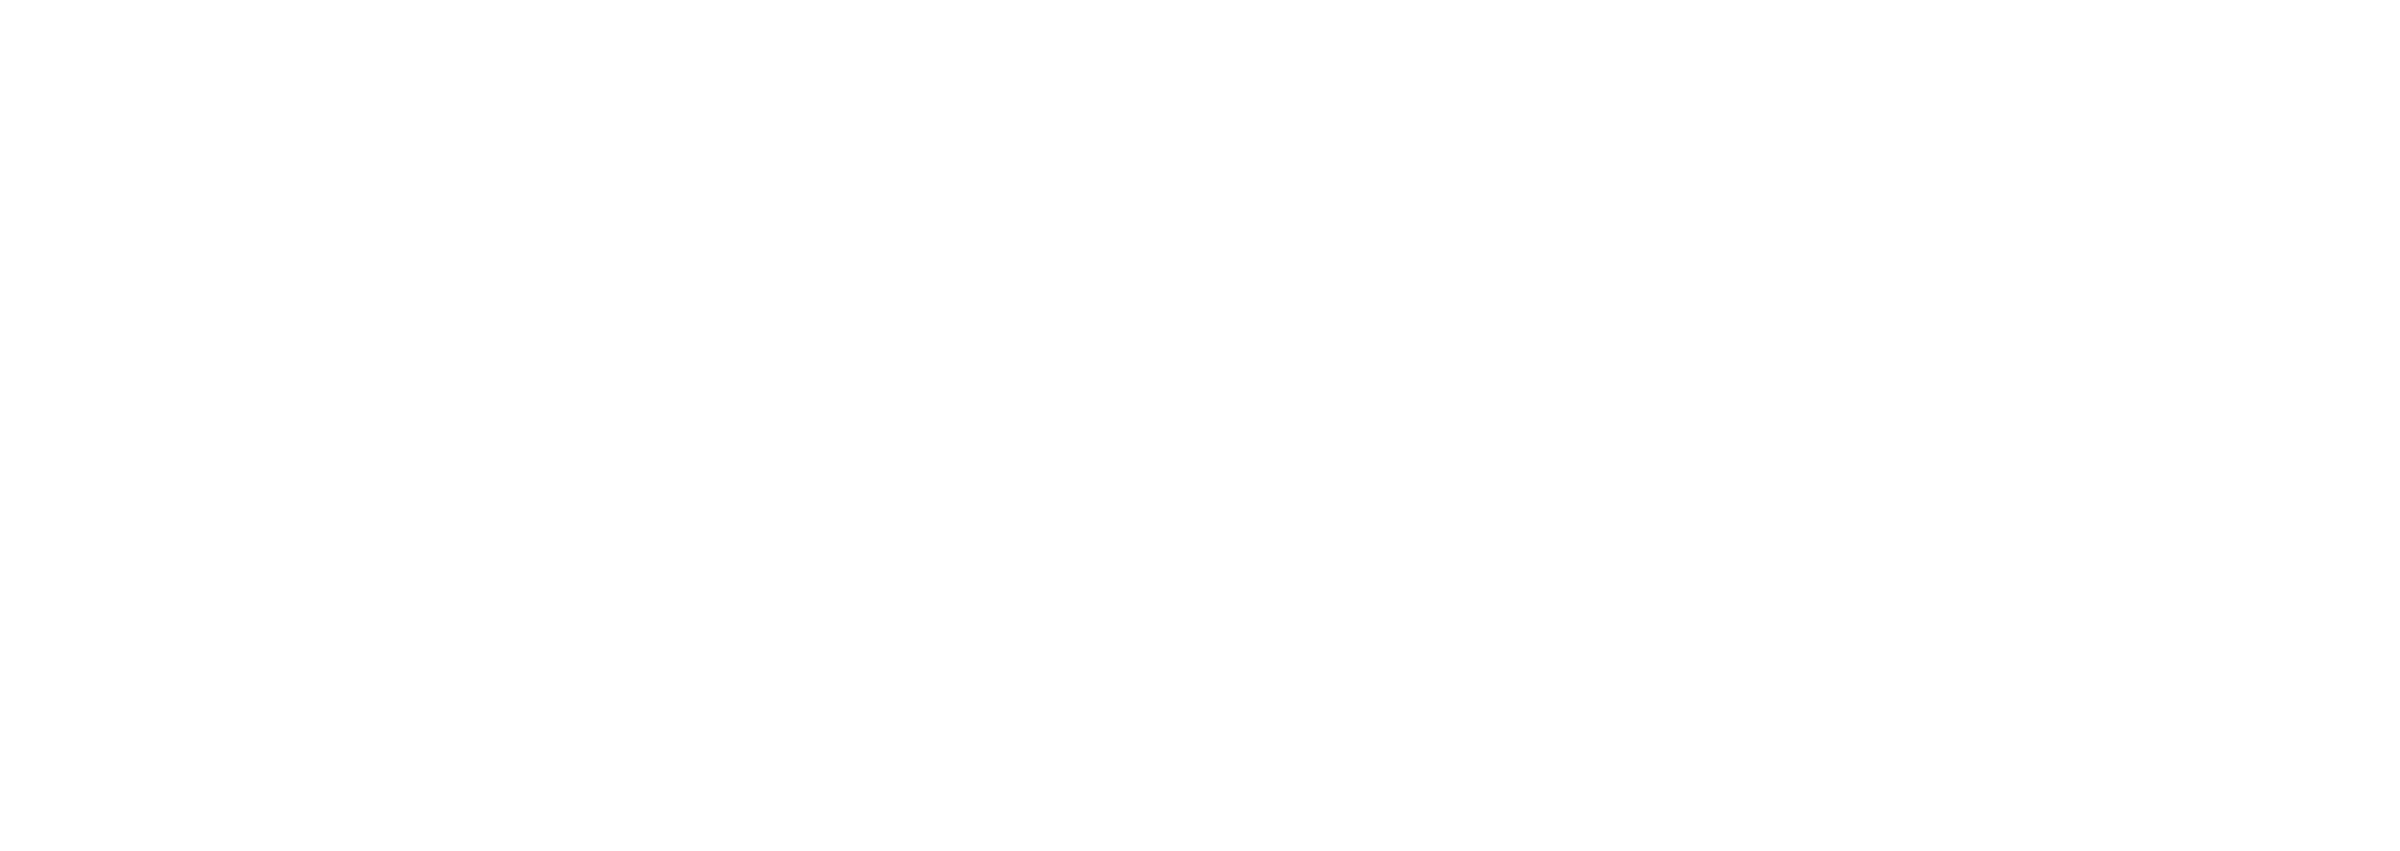 The Child Psychiatry Access Network (CPAN) Logo